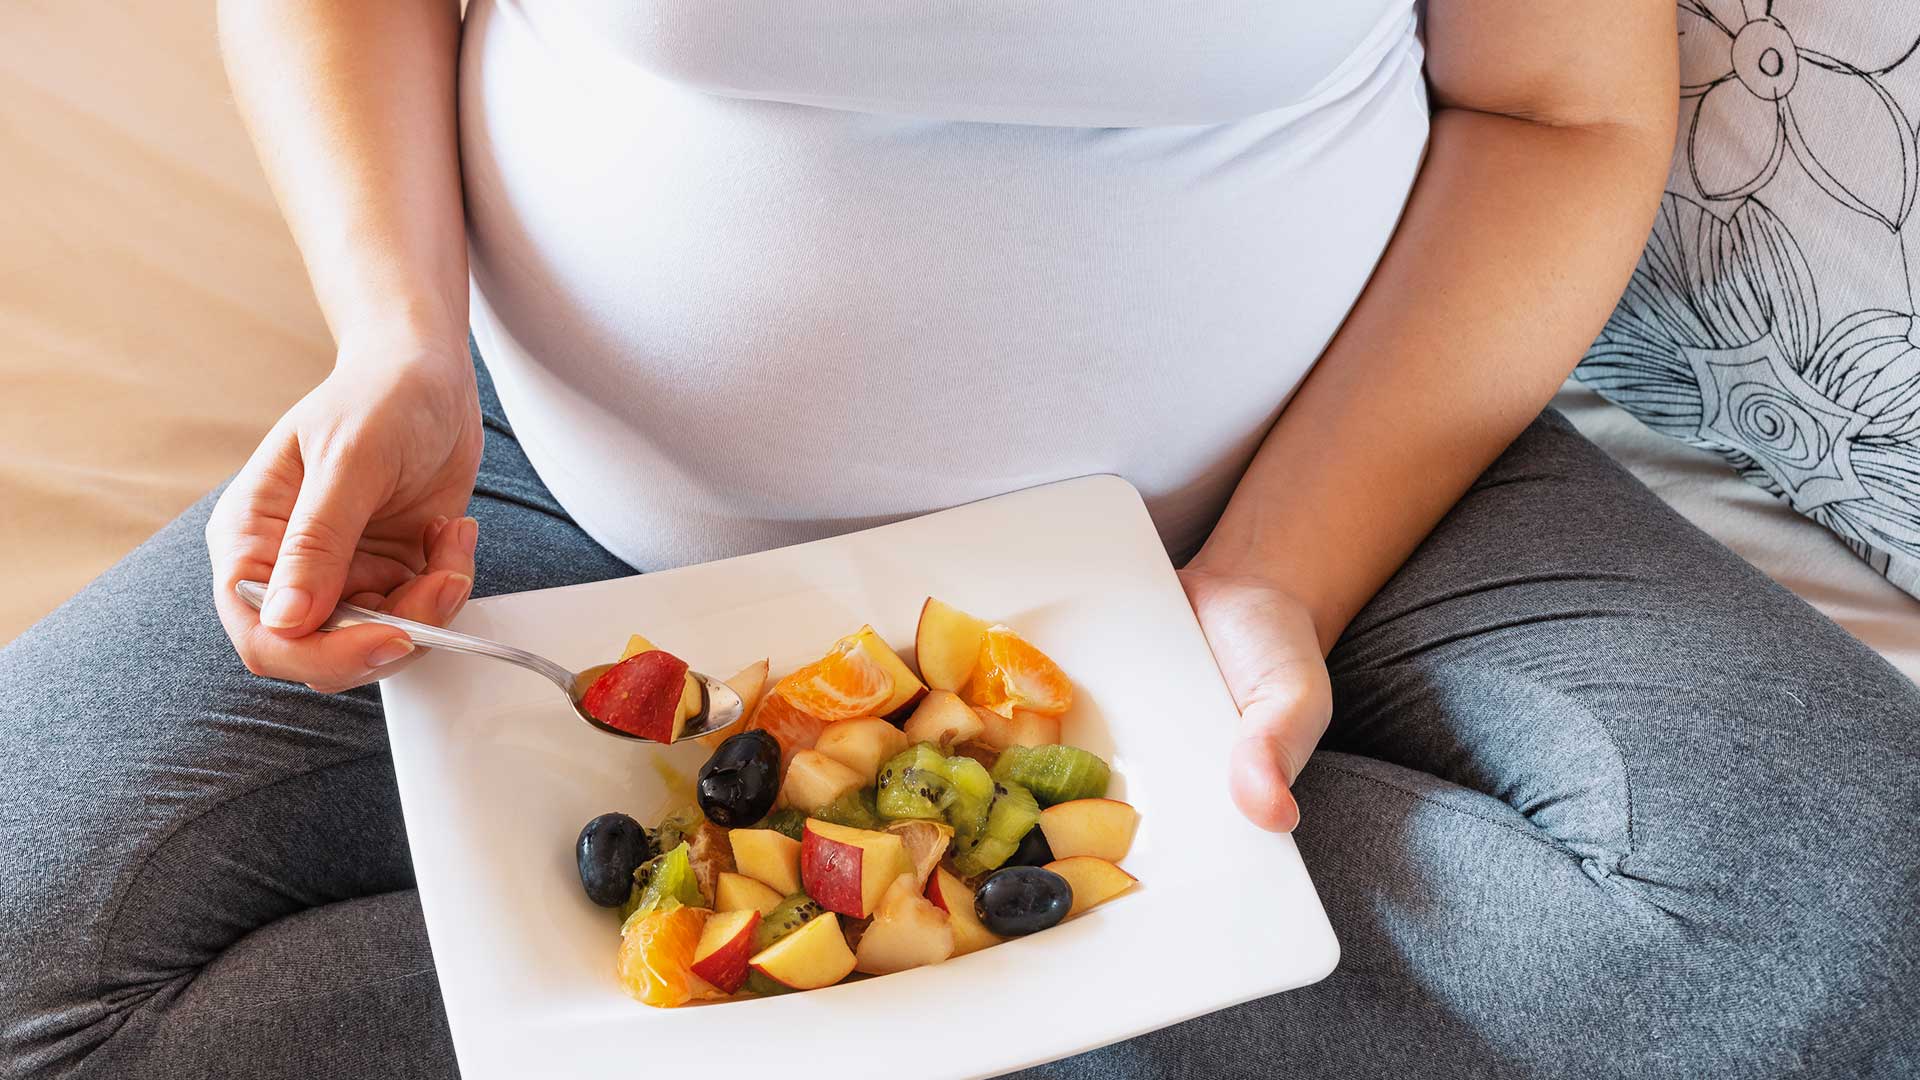 What to Avoid Eating and Doing When You’re Pregnant